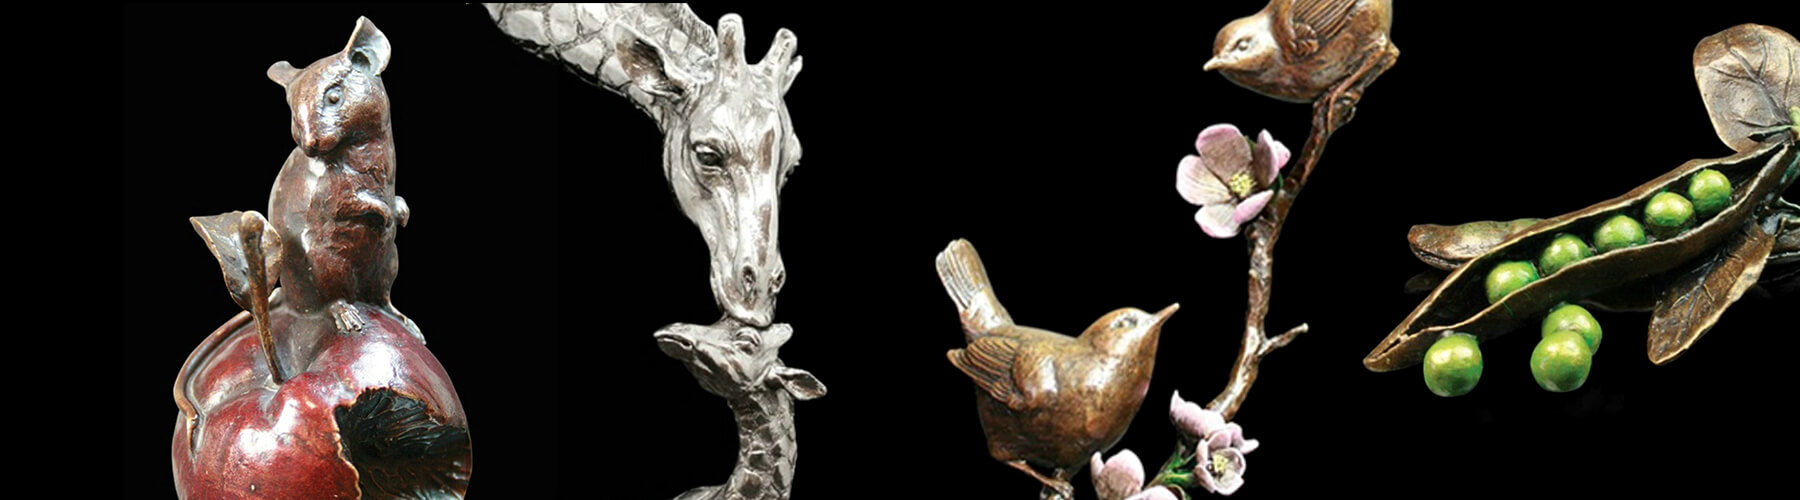 a number of bronze animal sculptures including mouse, giraffe and wrens 